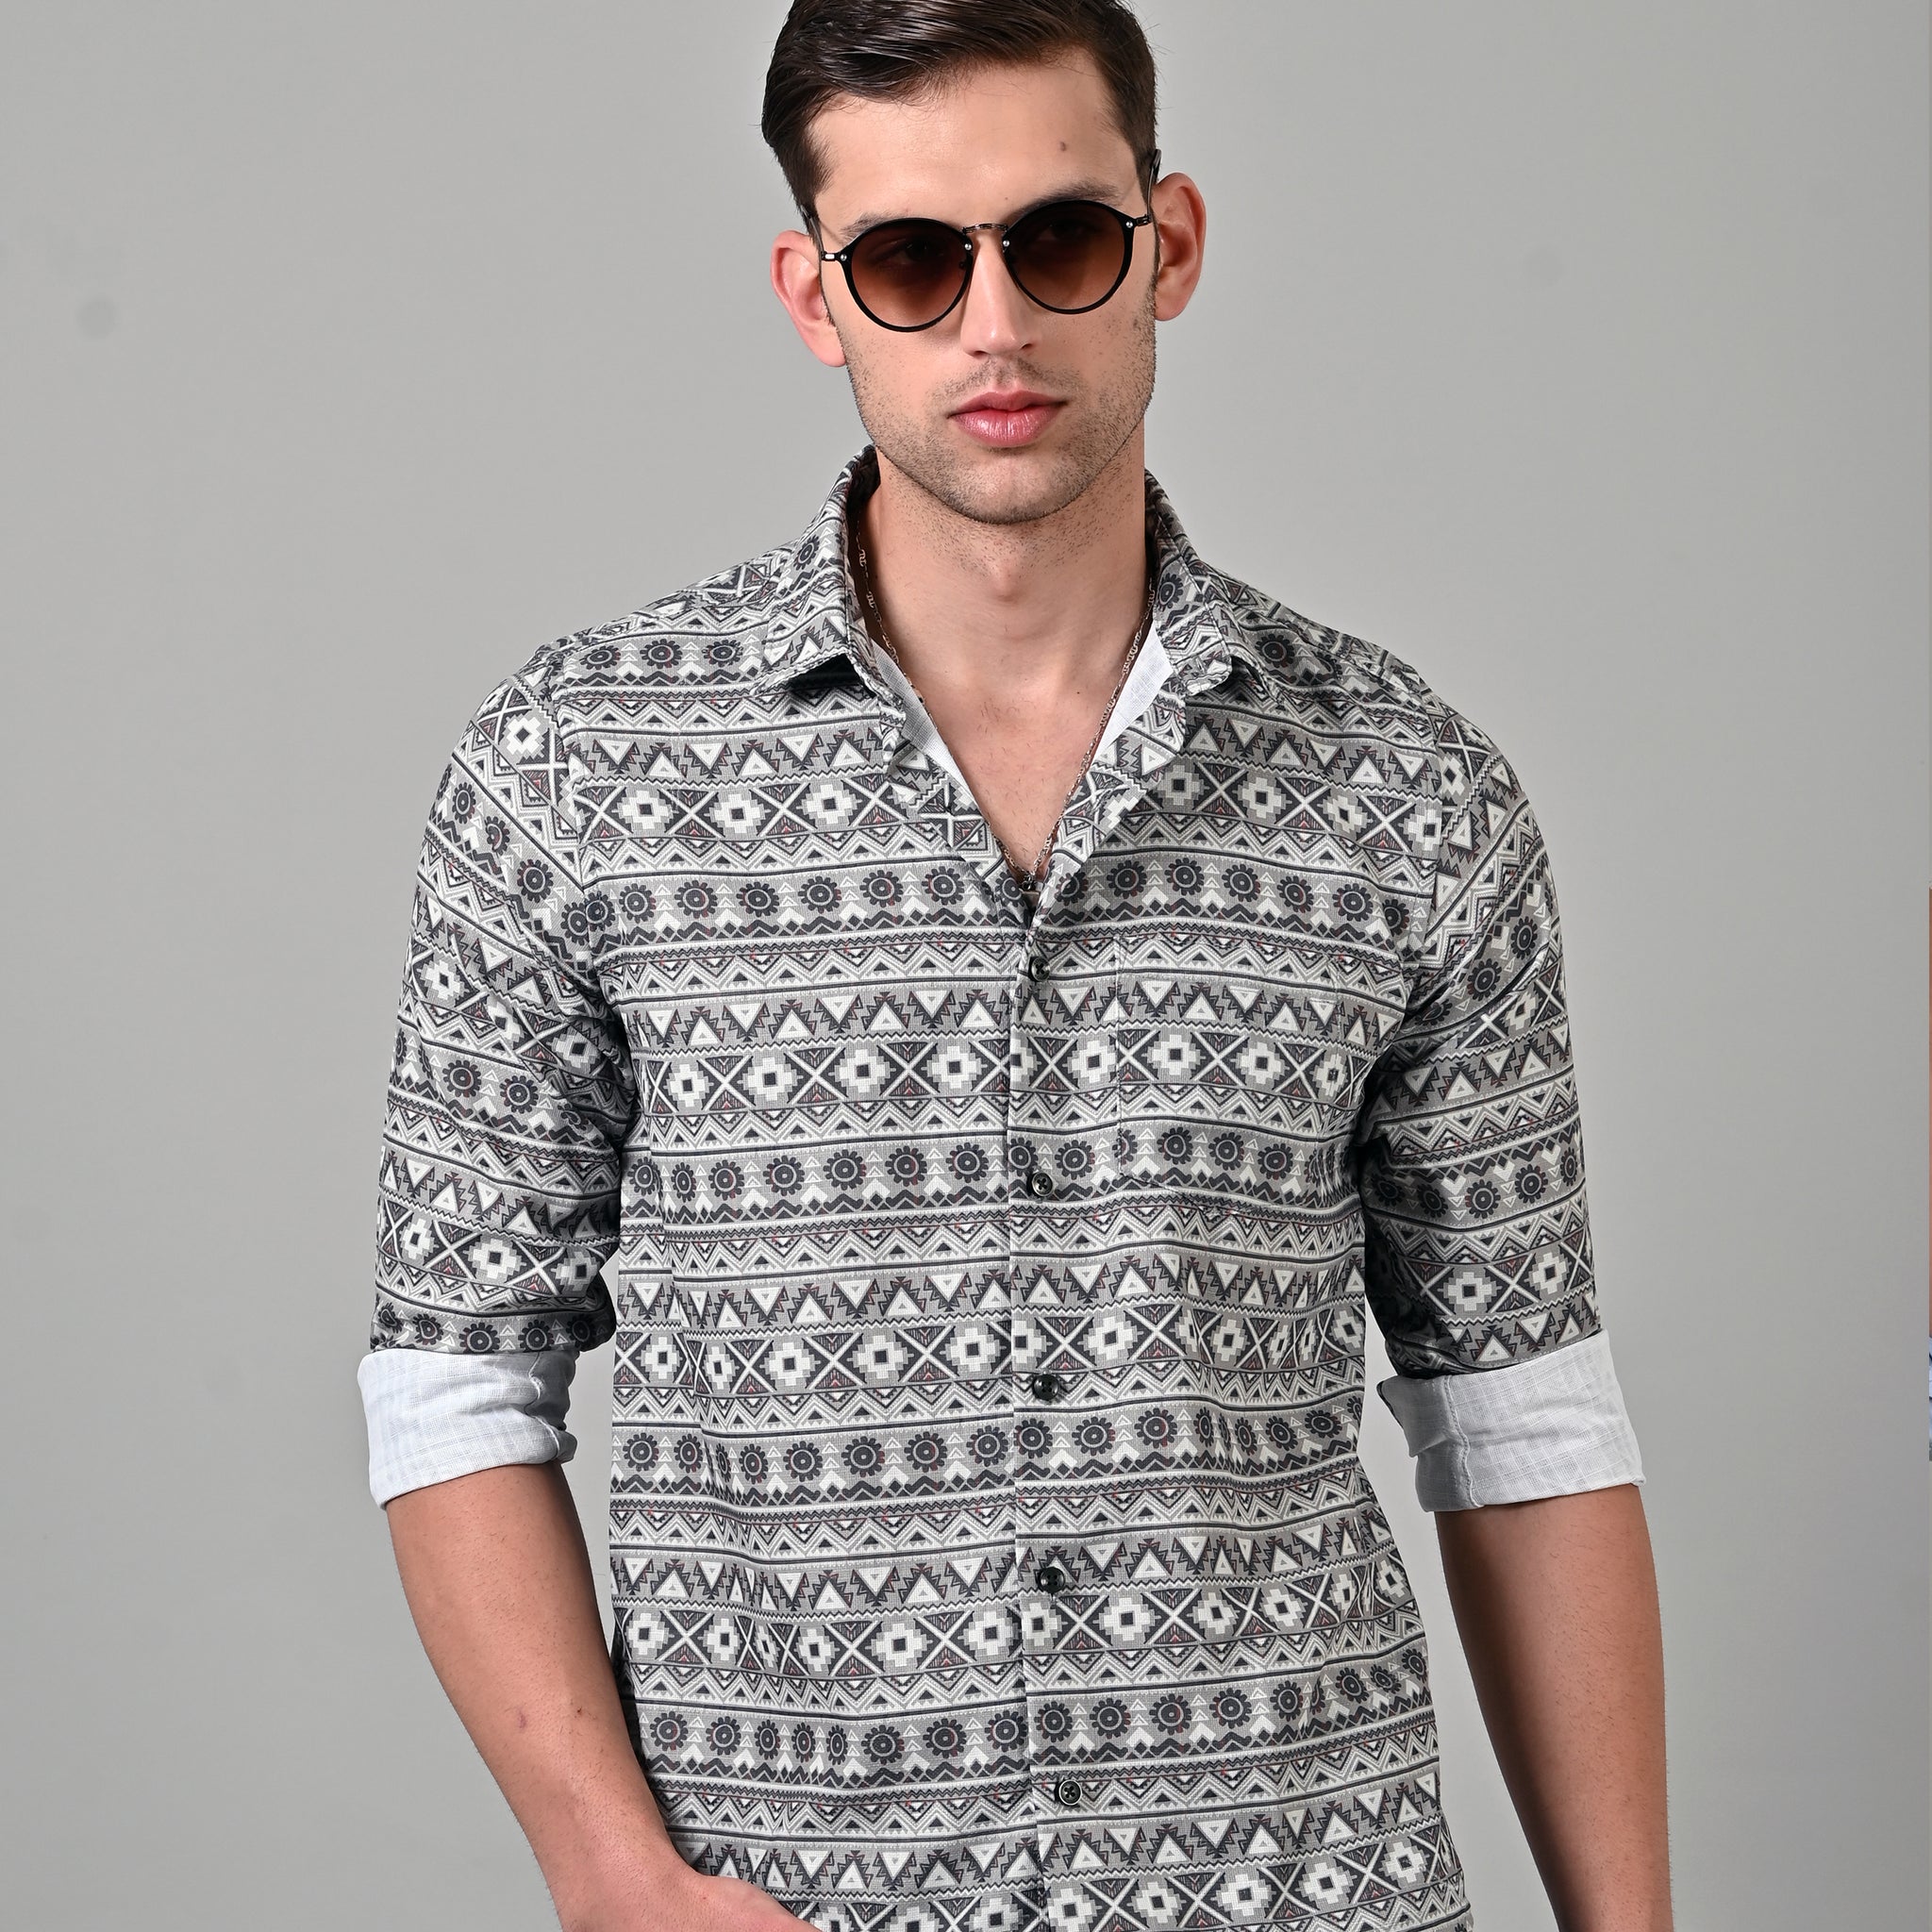 Imported Knit Printed Shirt